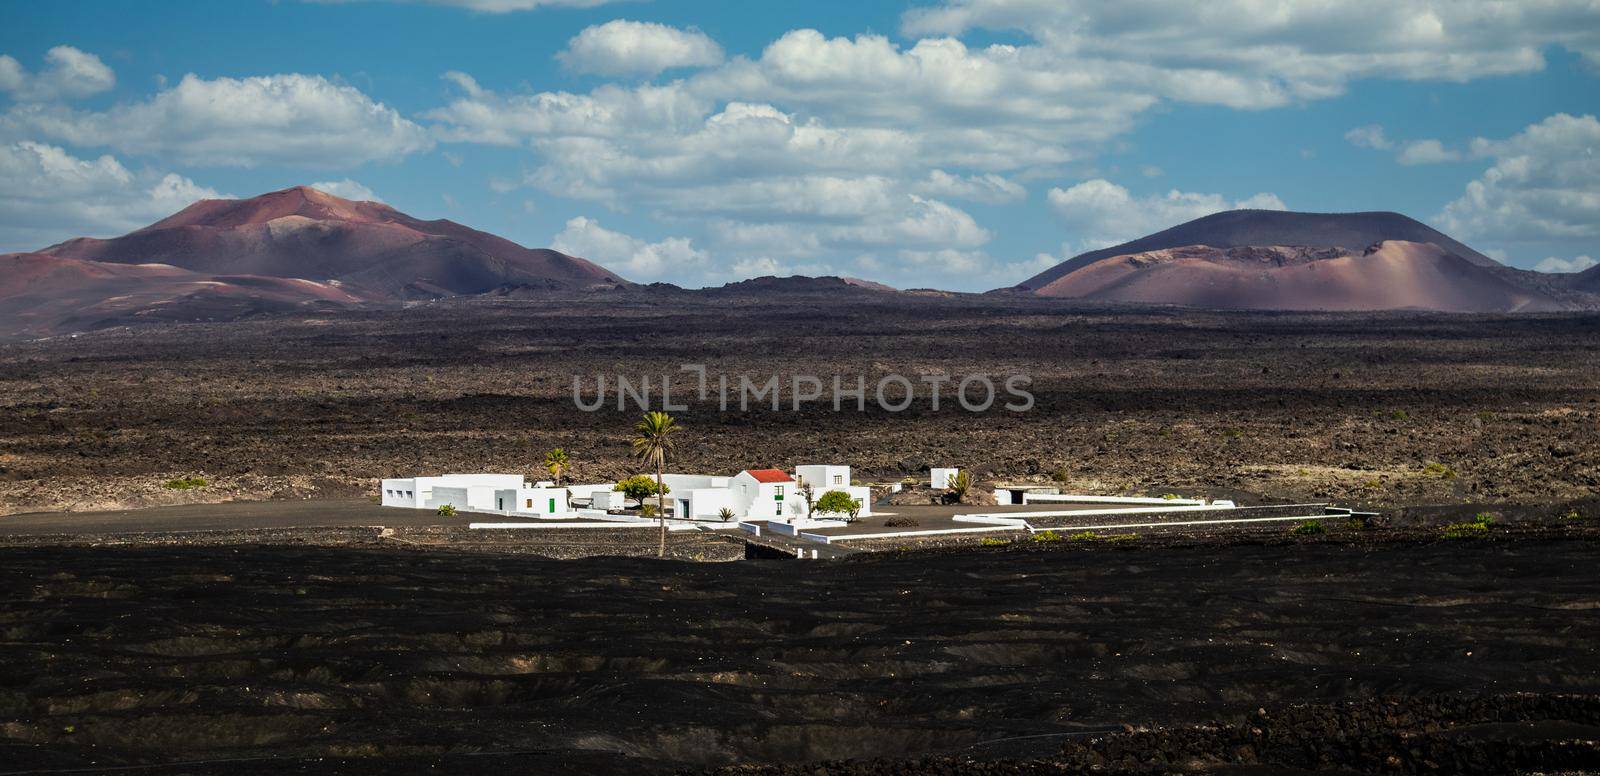 Amazing panoramic landscape of volcano craters in Timanfaya national park. Popular touristic village in La Gueria, Lanzarote island, Canary islans, Spain. Artistic picture by kasto